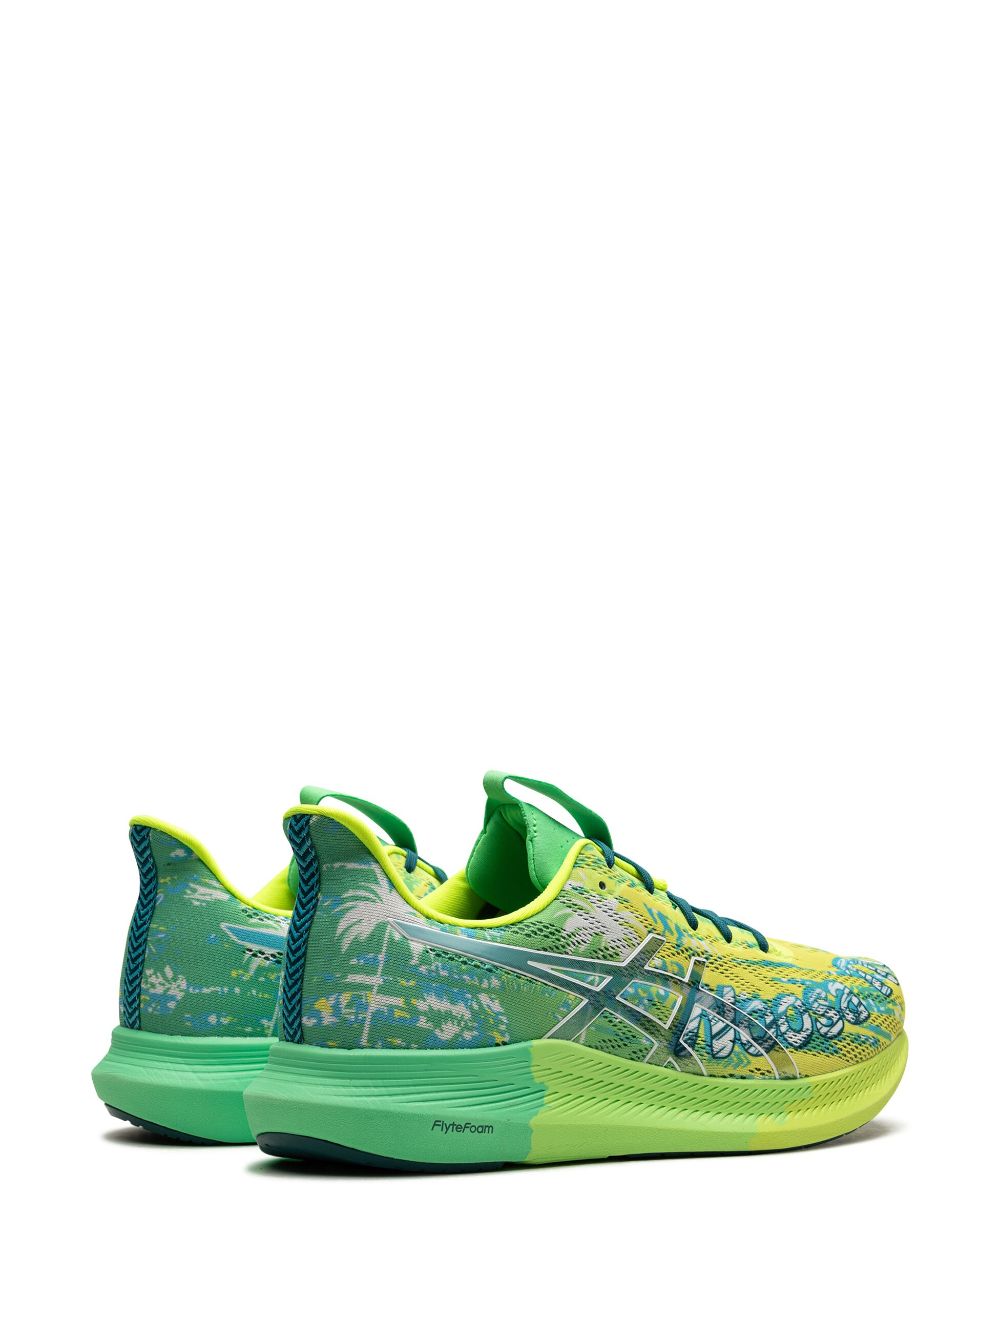 Shop Asics Noosa Tri 14 "safety Yellow Green" Sneakers